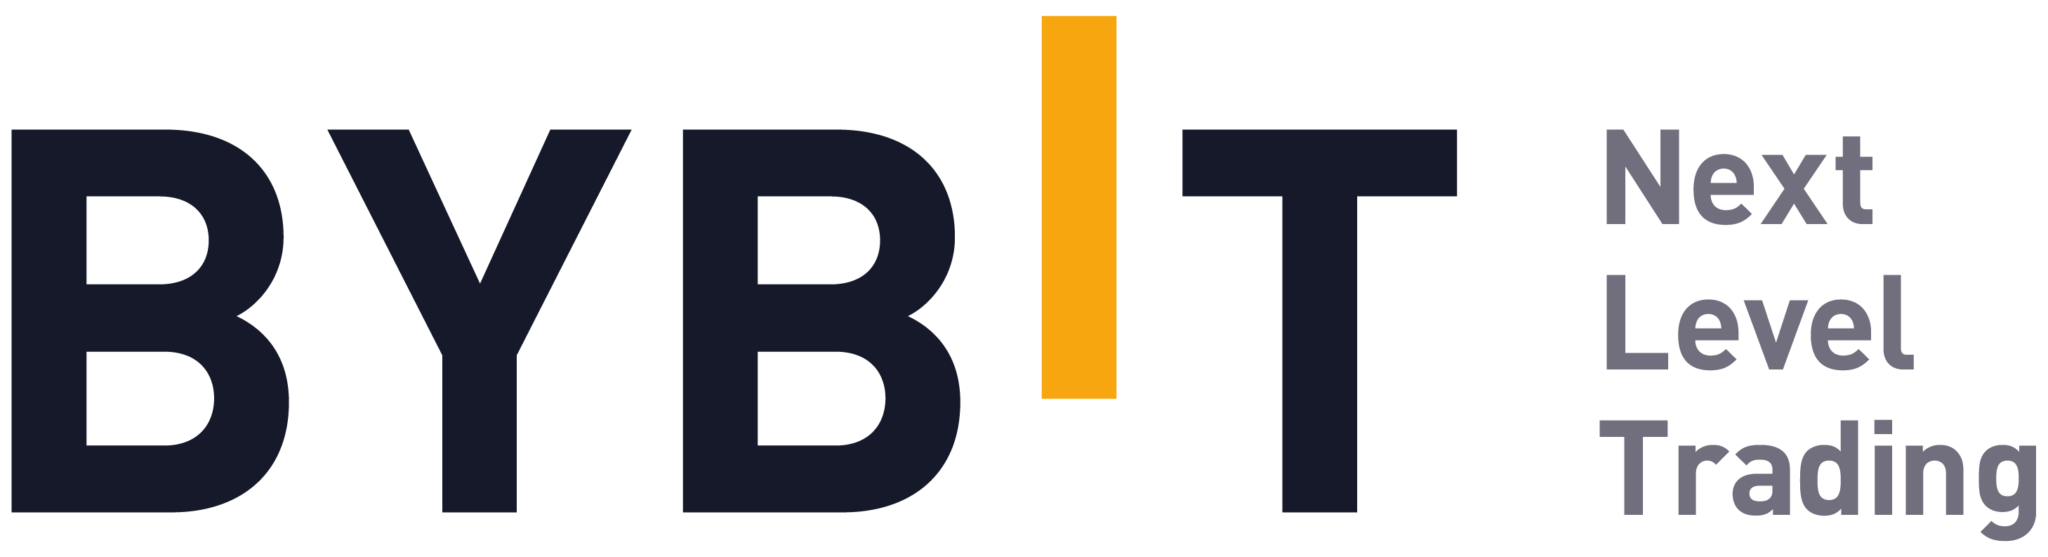 Bybits mission is to empower crypto believers with next generation tools.